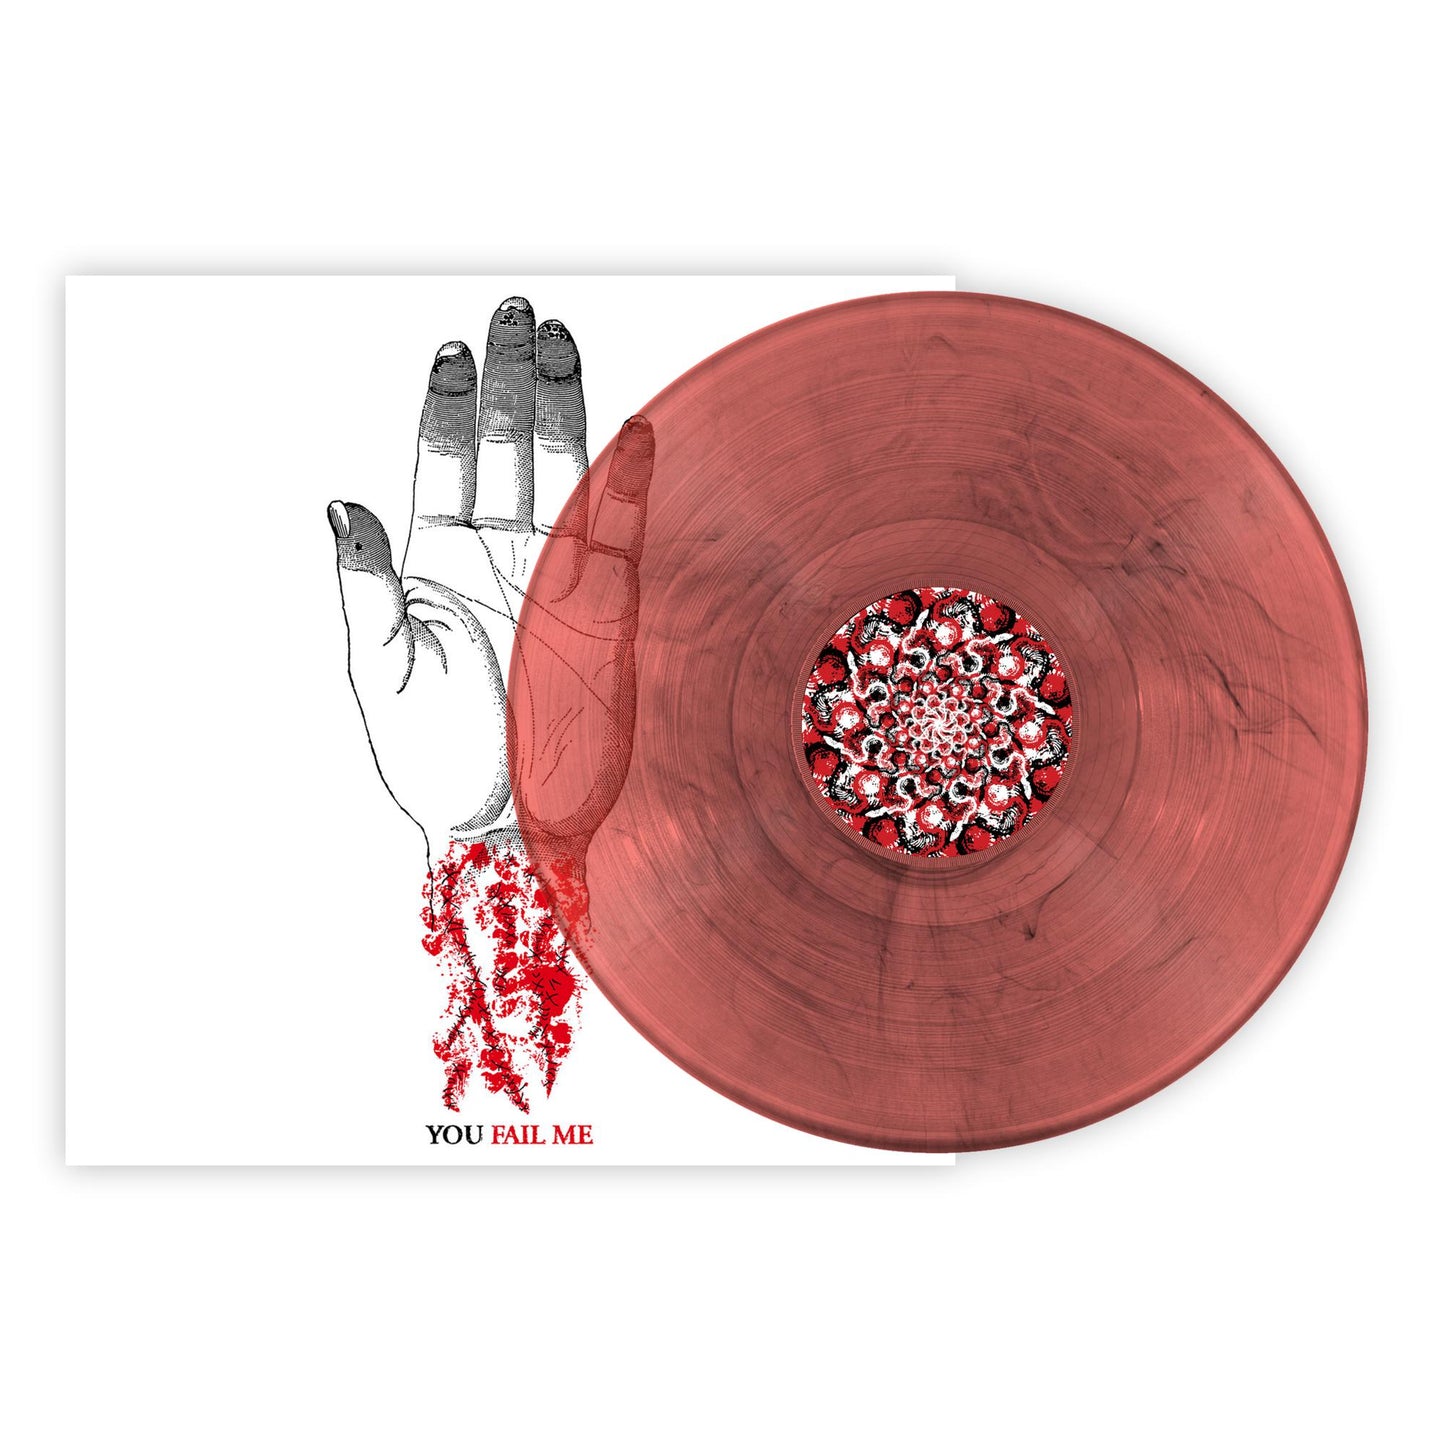 Converge - You Fail Me (Redux, Colored Vinyl, Red, Black, Indie Exclusive)